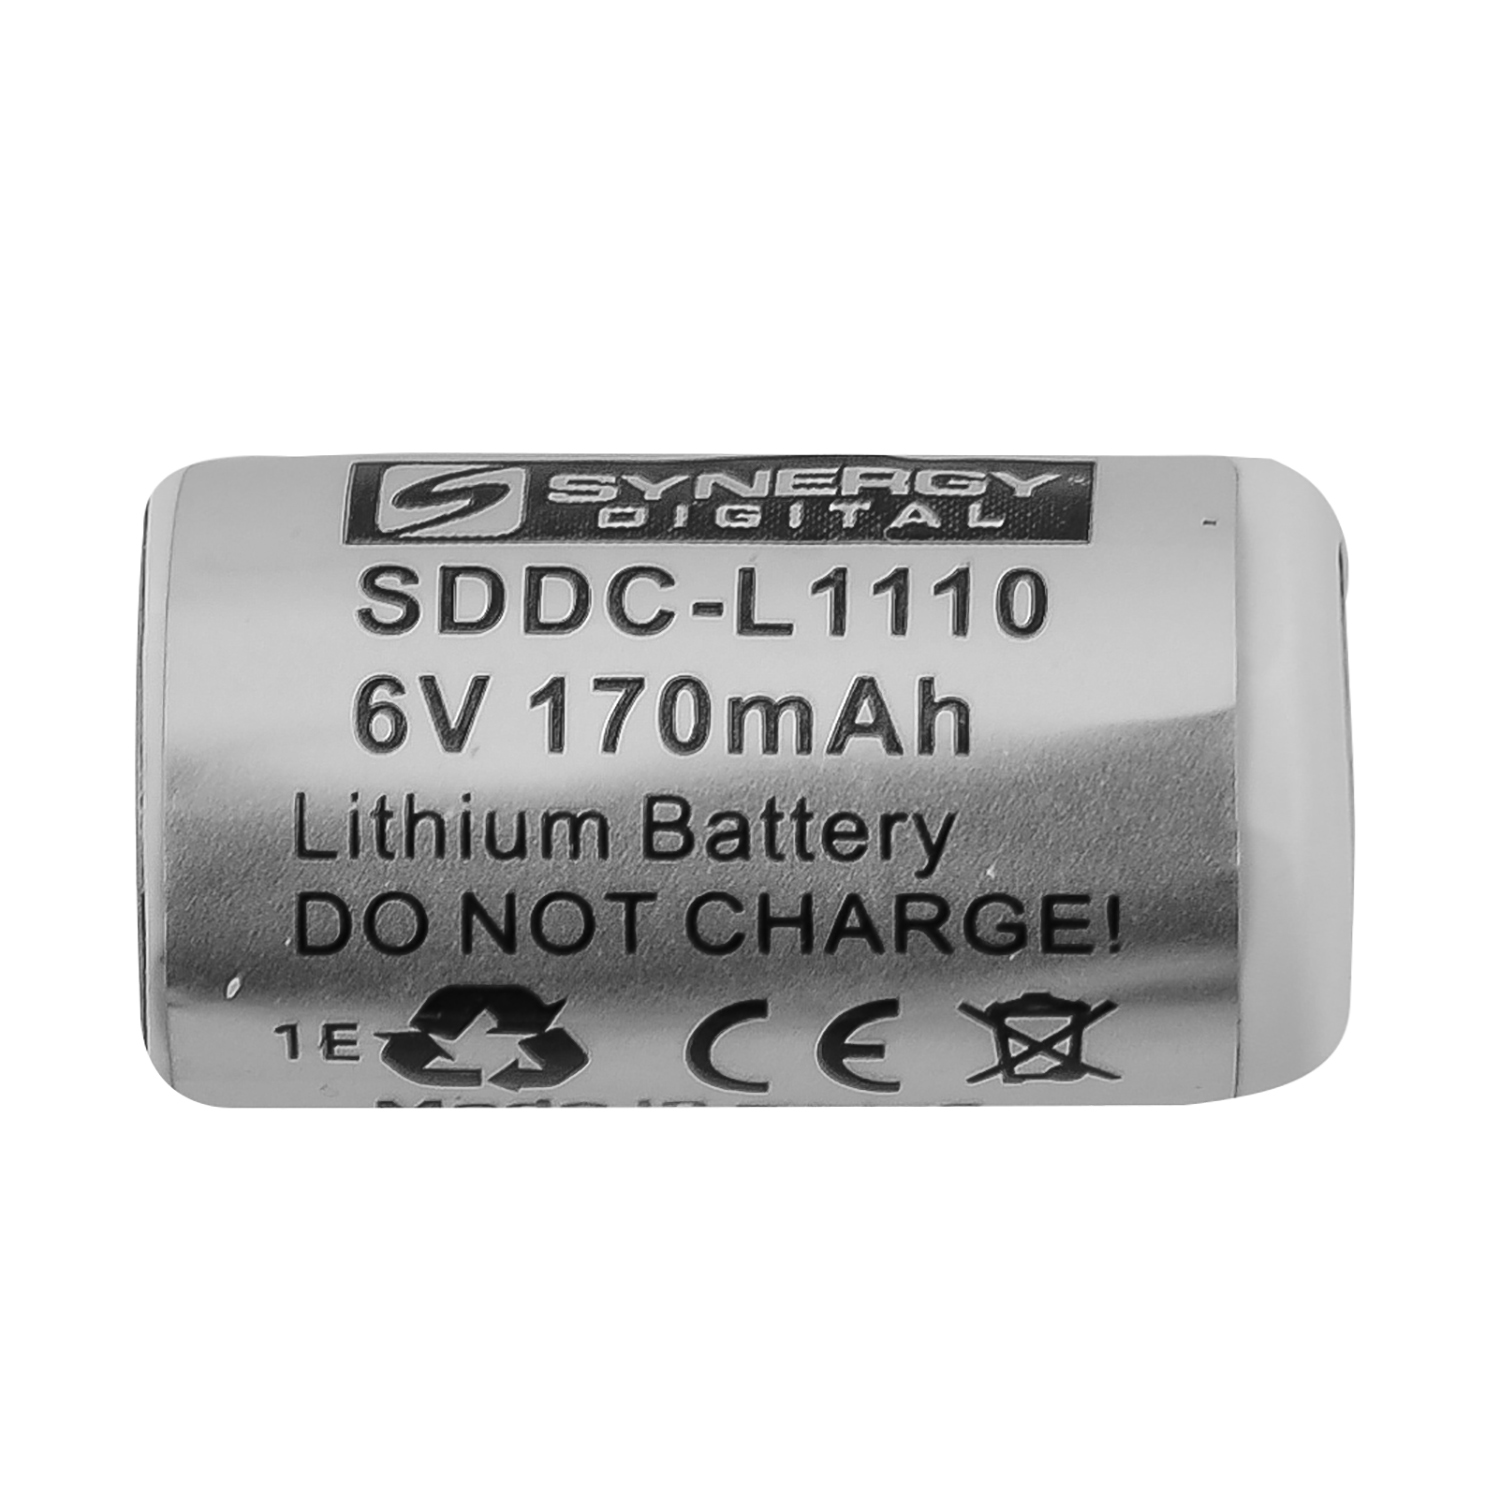 SDDC-L1110 Ultra High Capacity (Li-Ion, 6V, 160 mAh) Battery - Replacement for Pet Stop UltraElite Receiver Battery